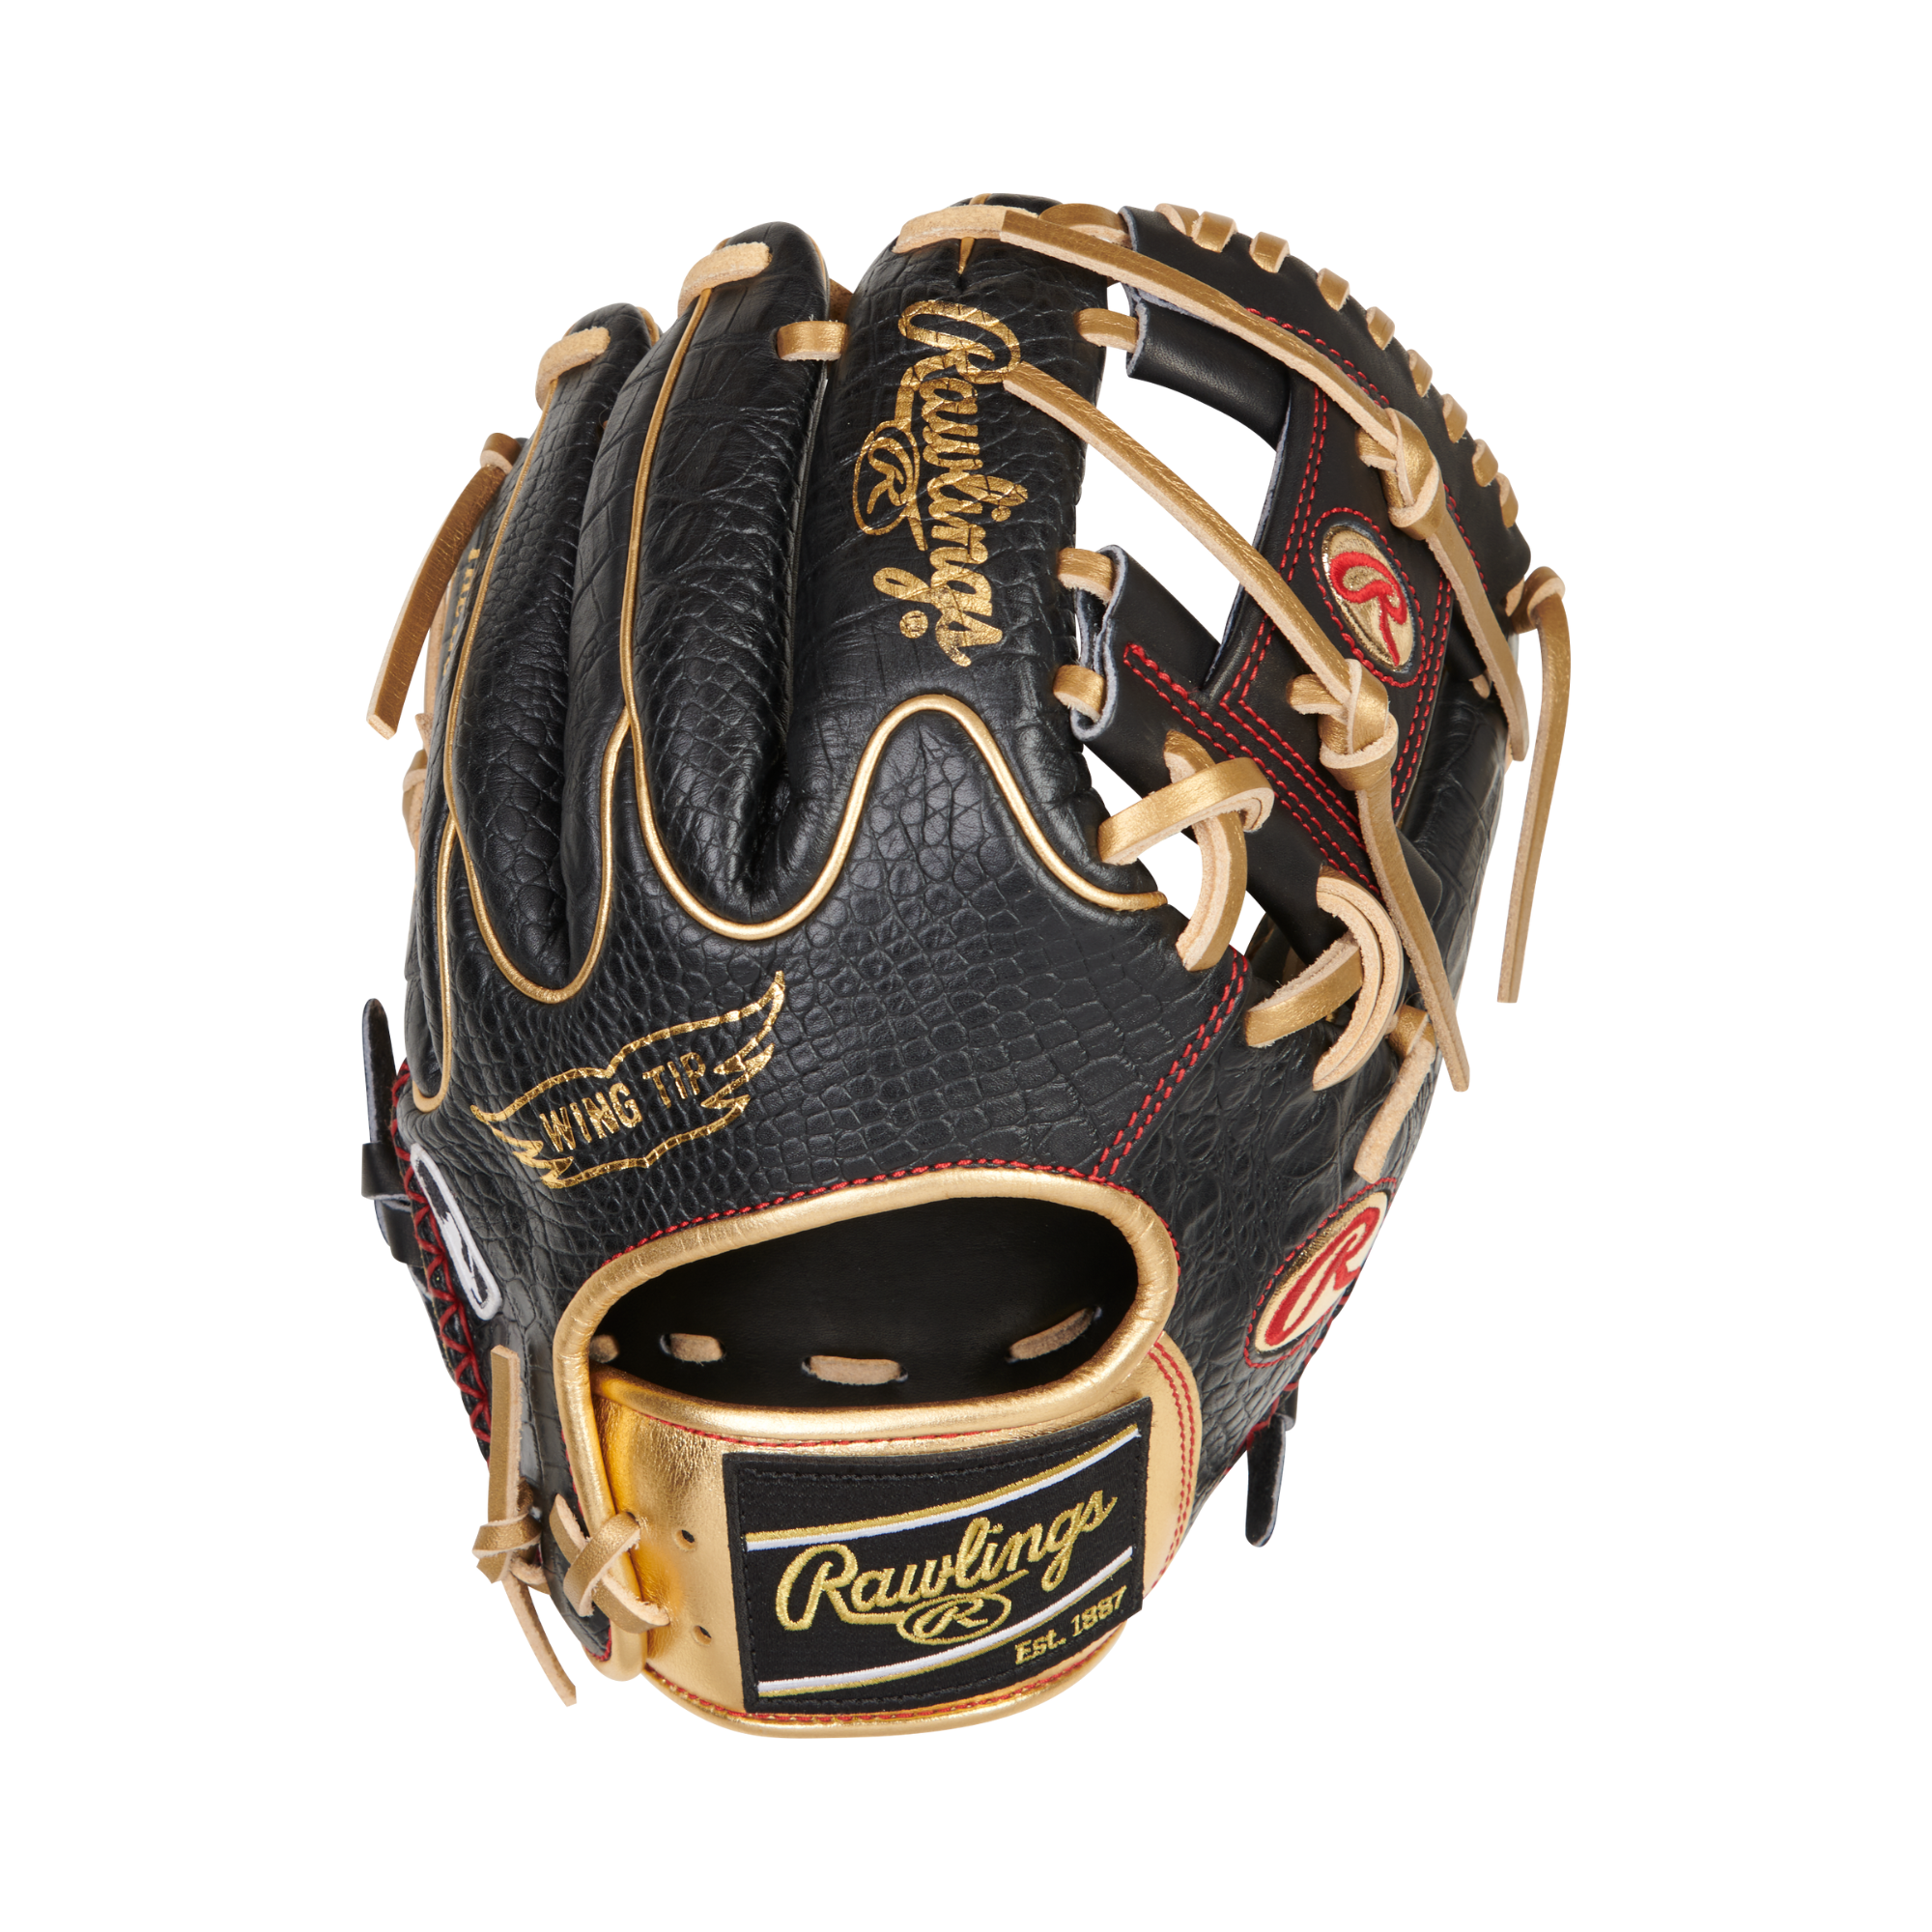 Rawlings June 2022 Gold Glove Club RGGC(GOTM) 11.5-inch Infield Heart of the Hide